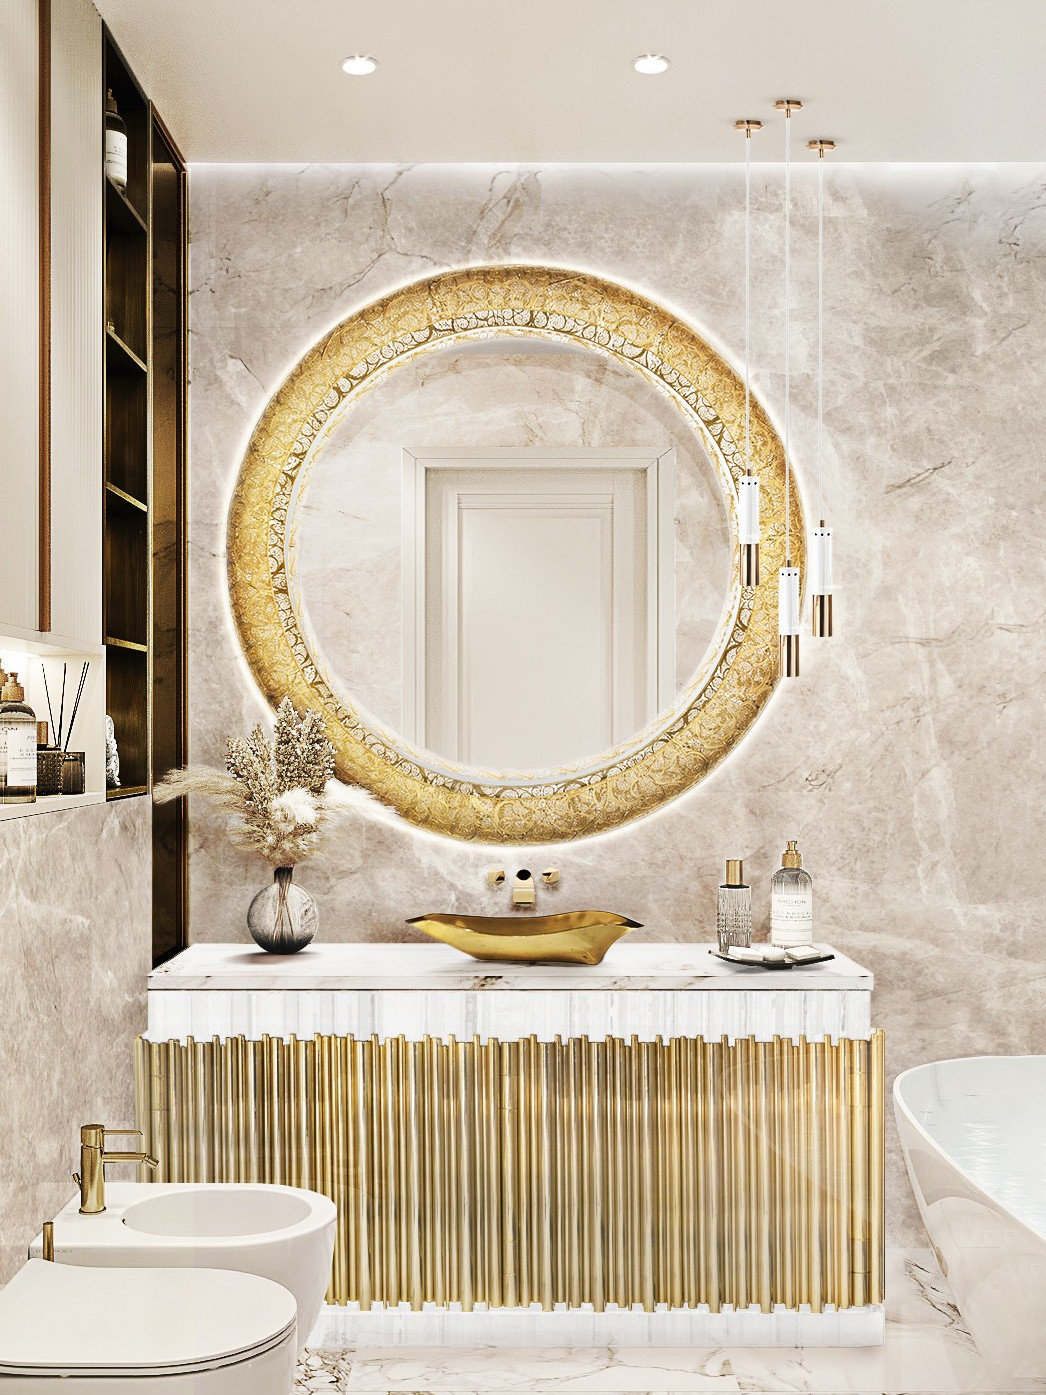 Bathroom design with white and gold washbasin home inspiration ideas